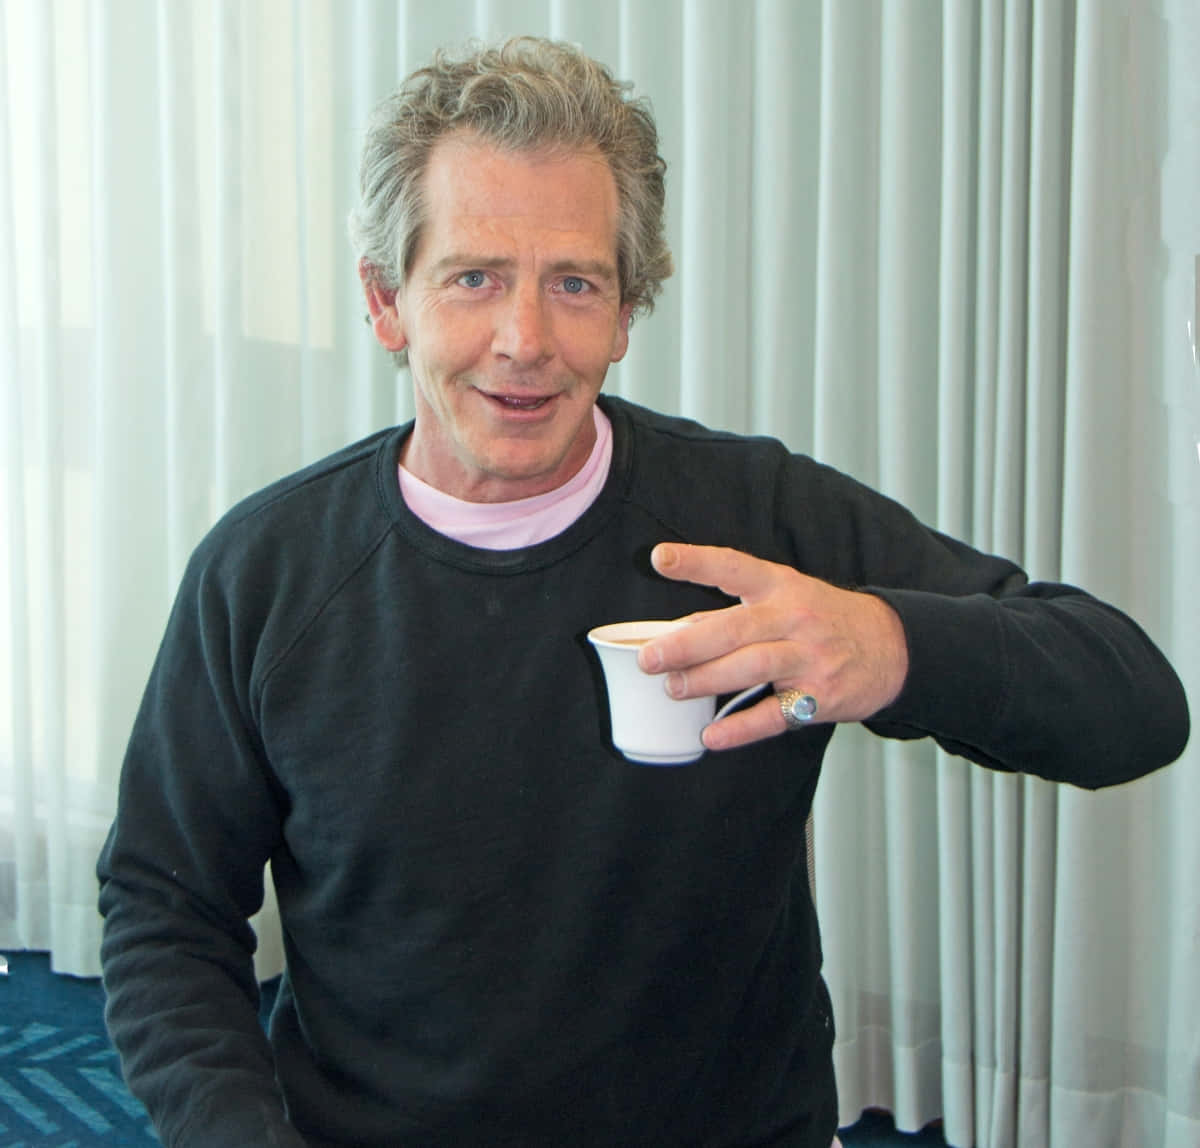 Ben Mendelsohn Casual Portrait With Coffee Cup Wallpaper